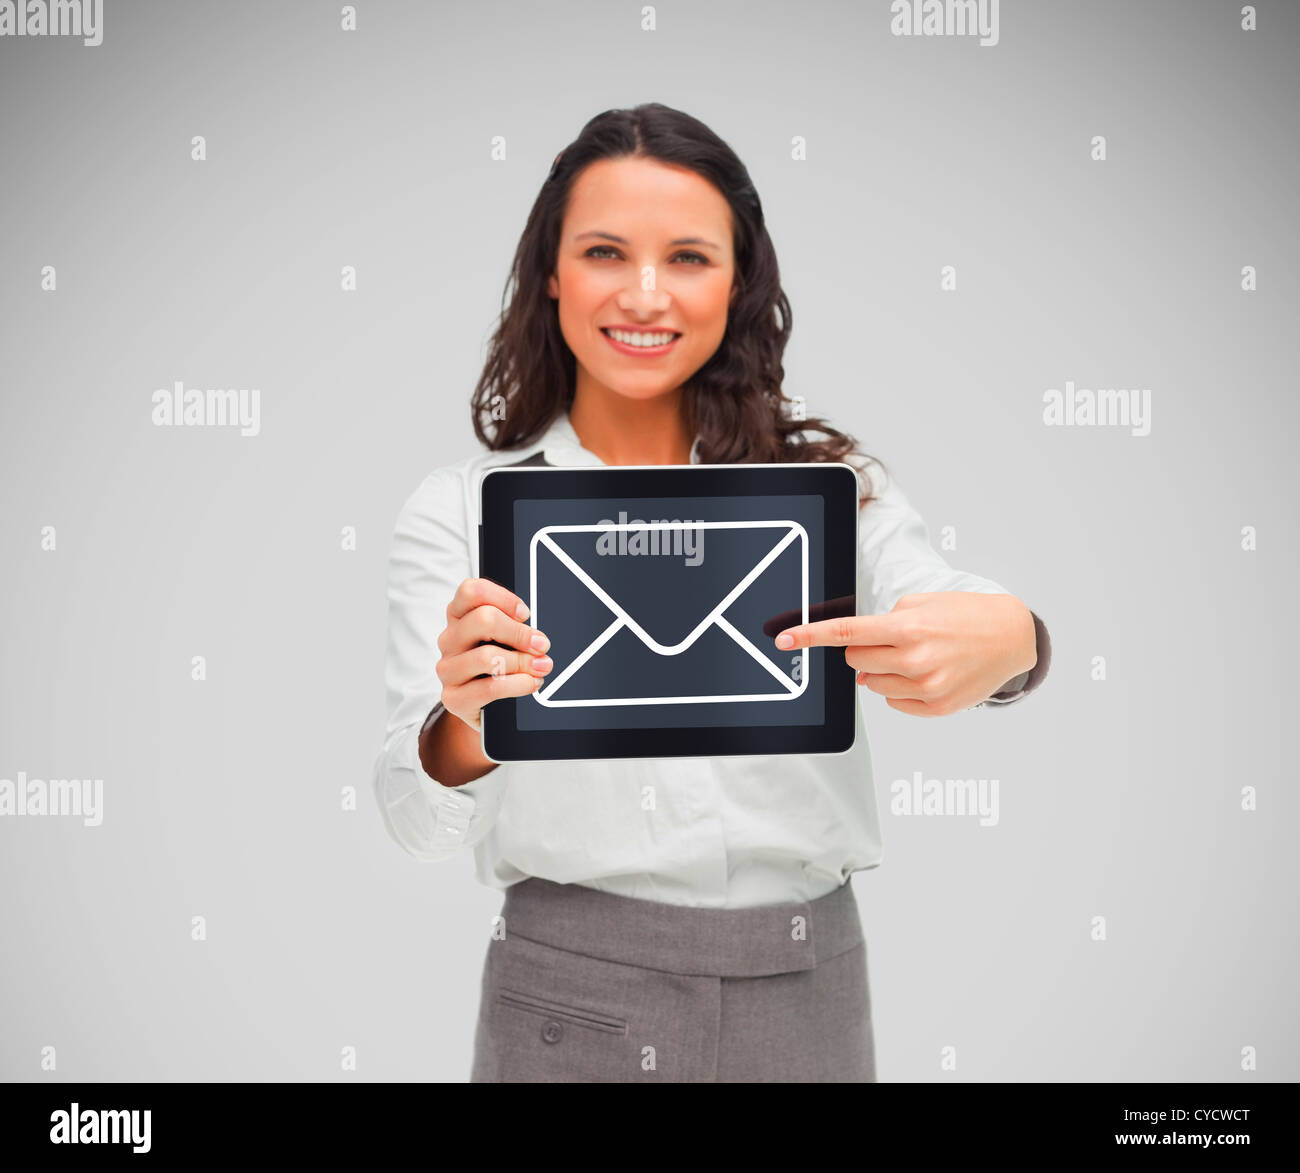 Woman holding a tablet pc smiling Stock Photo